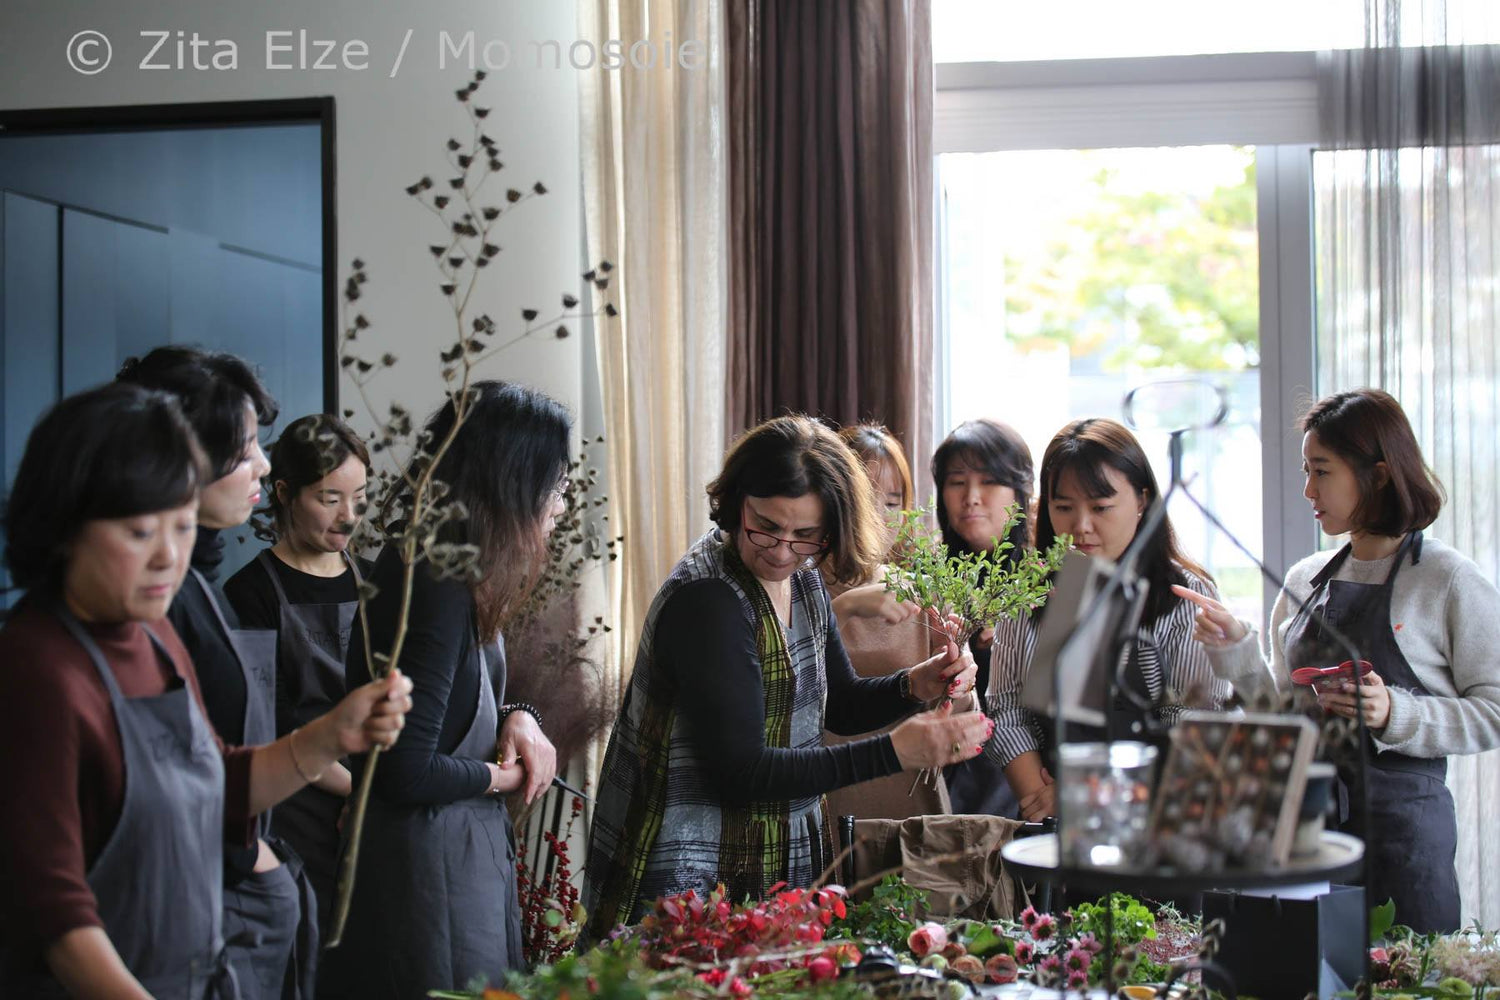 Zita Elze sorroundend by women during a flower academy class